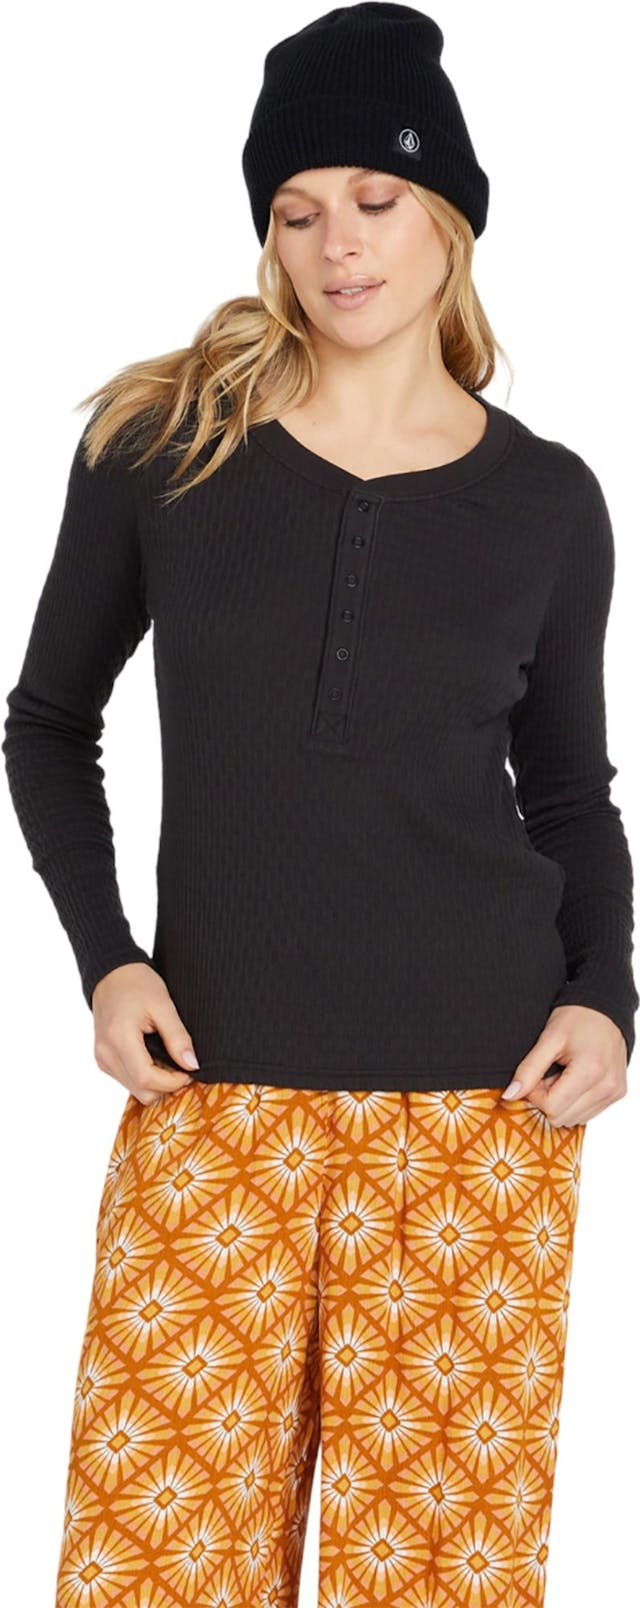 Product image for Mystery Mountain Henley Top - Women's